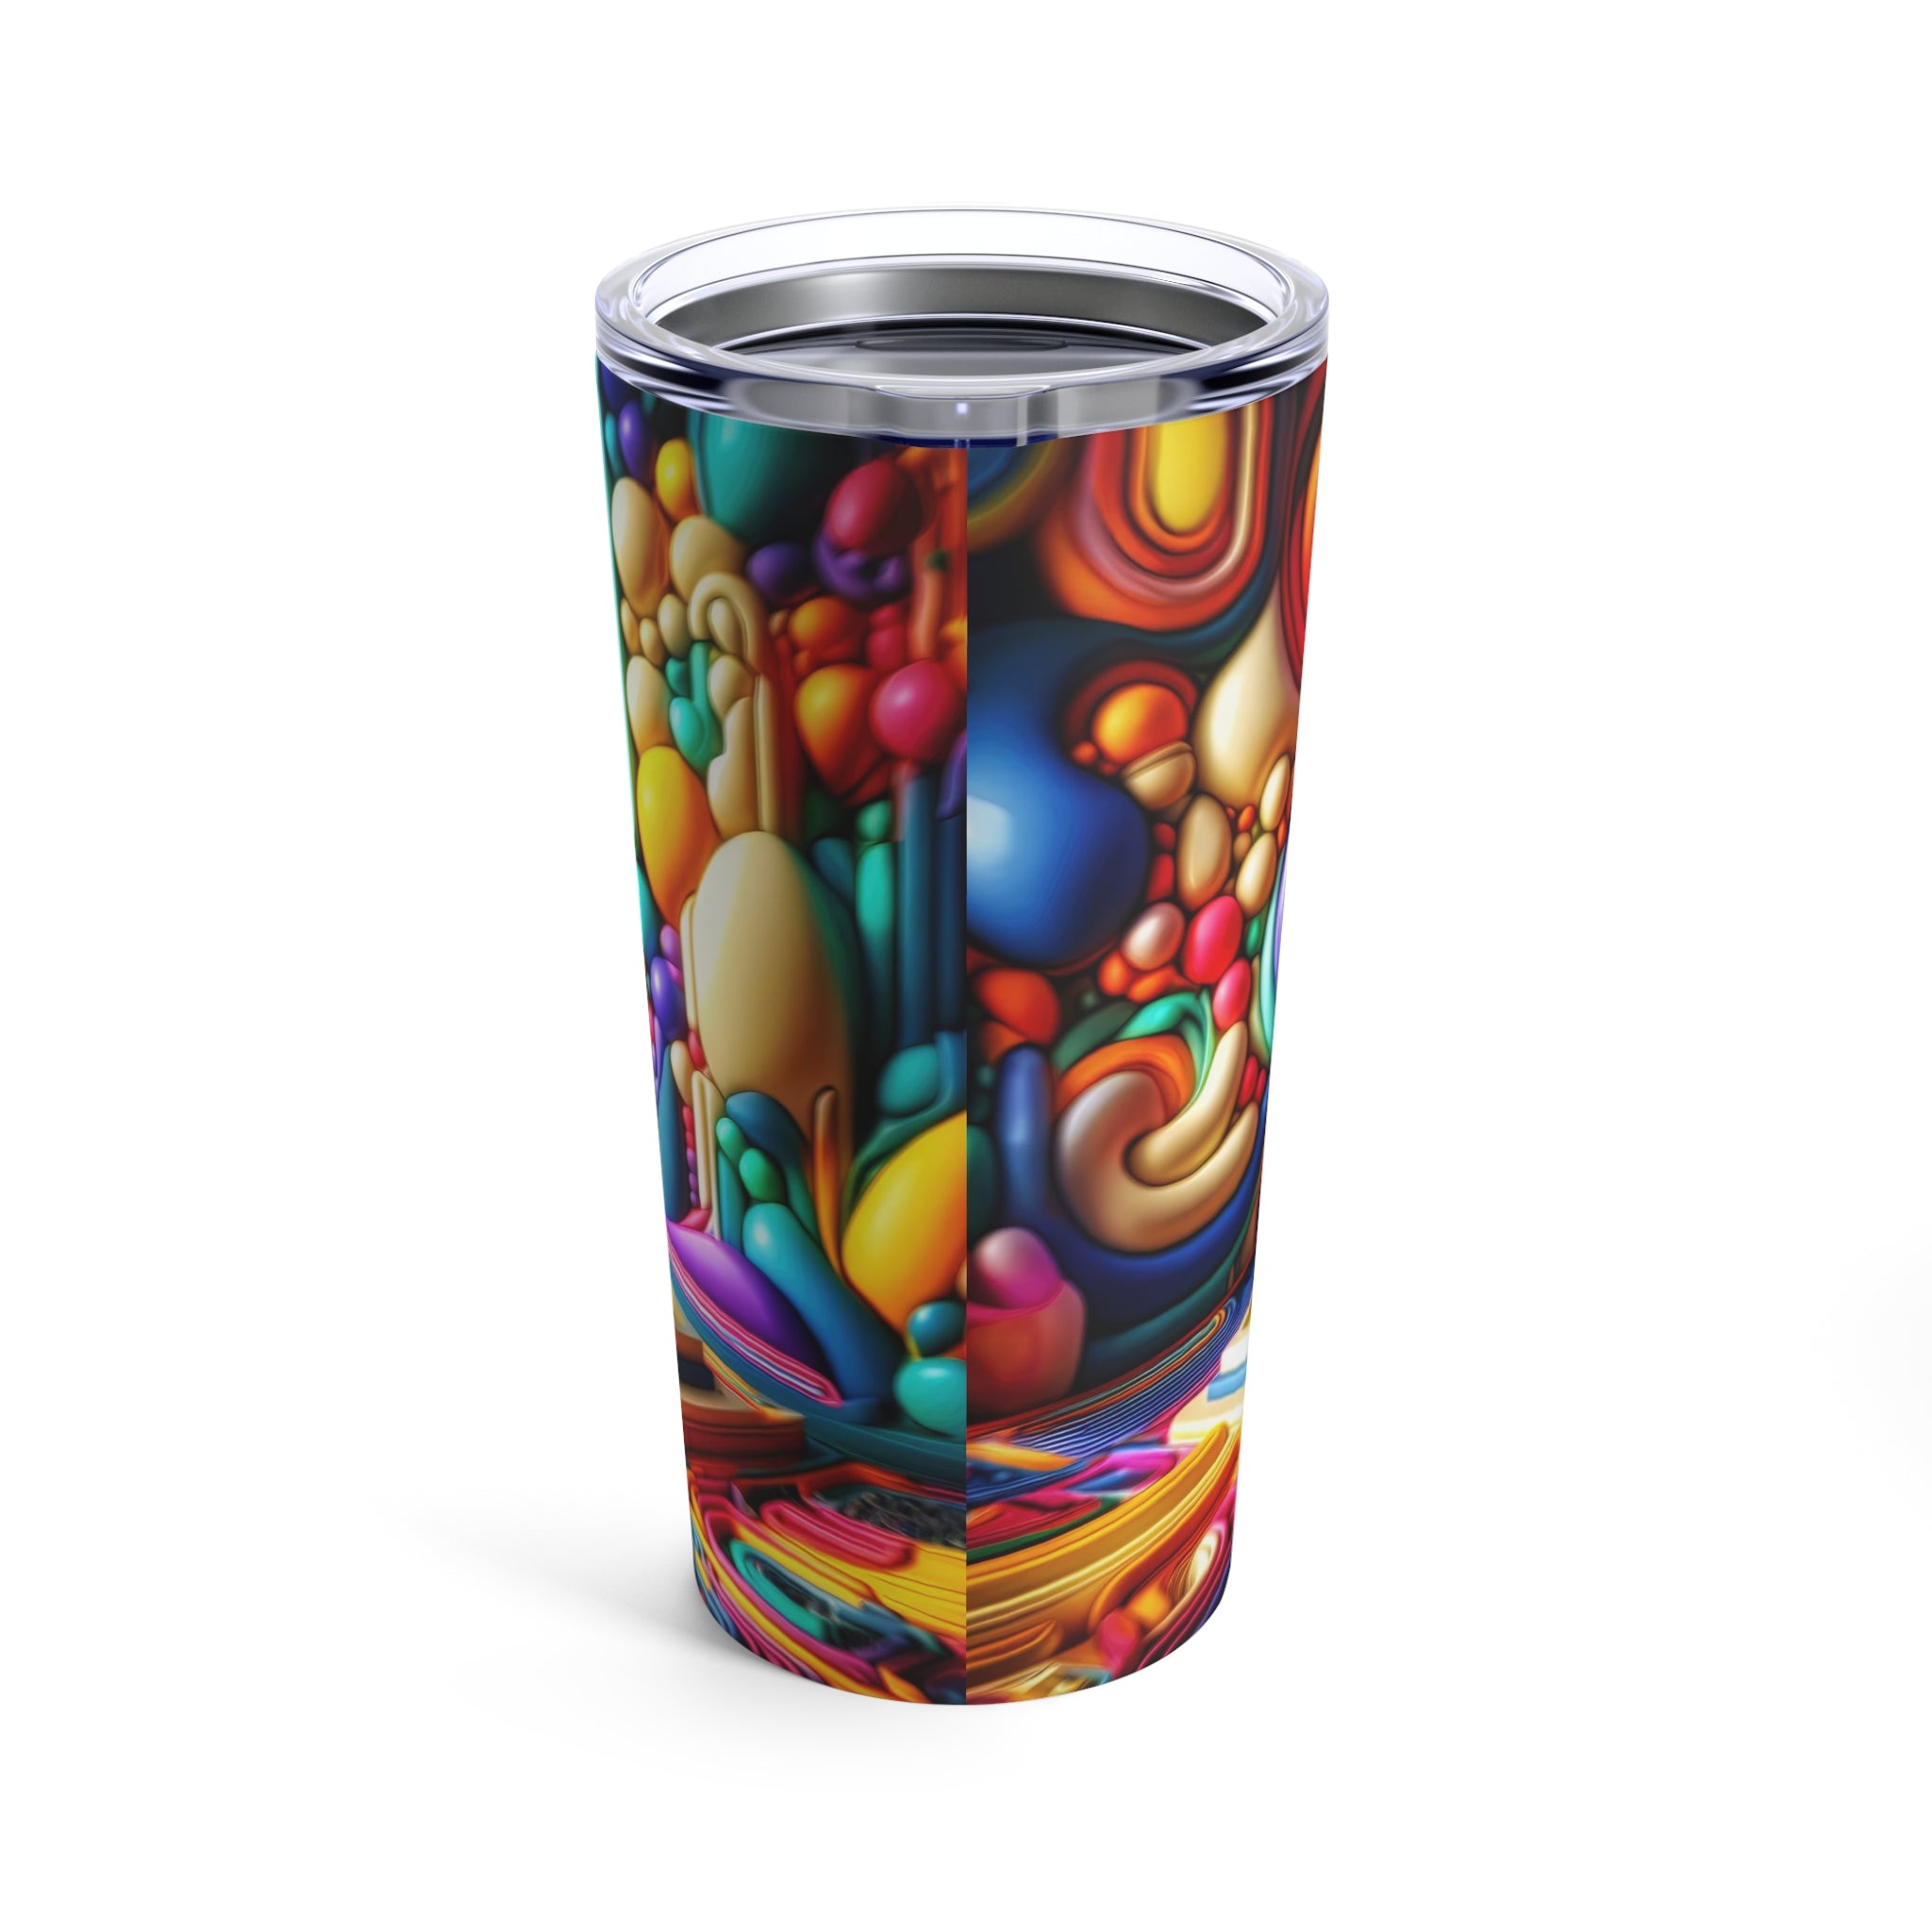 Candylicious Bloom in Whimsyland Tumbler 20oz